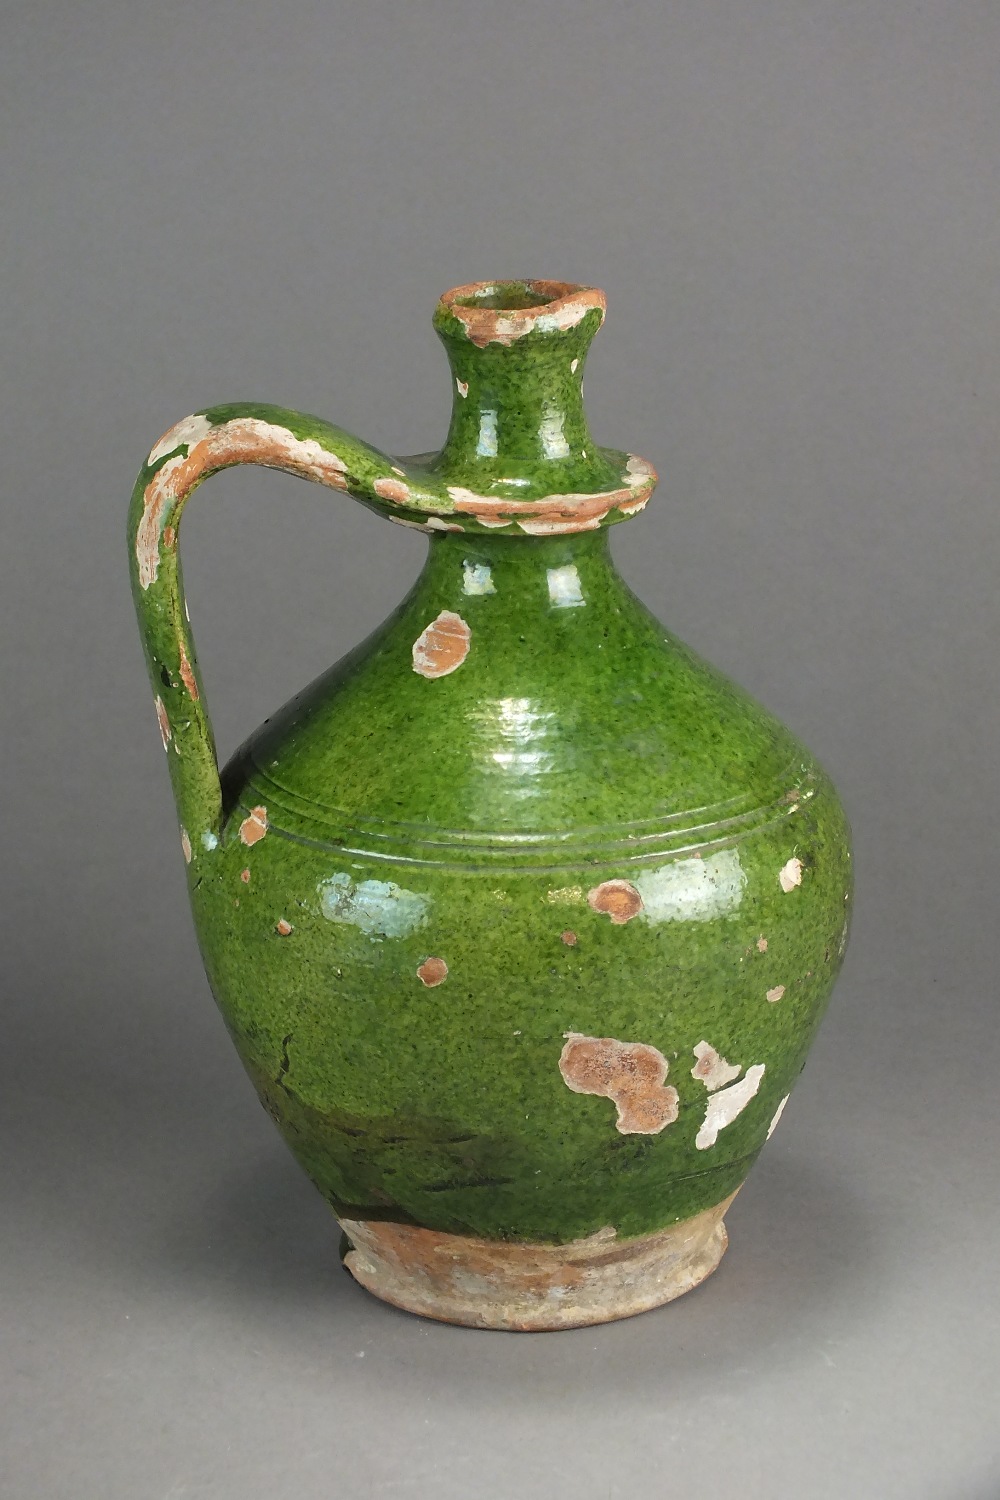 A medieval green glazed stoneware wine jug with single handle, 21.